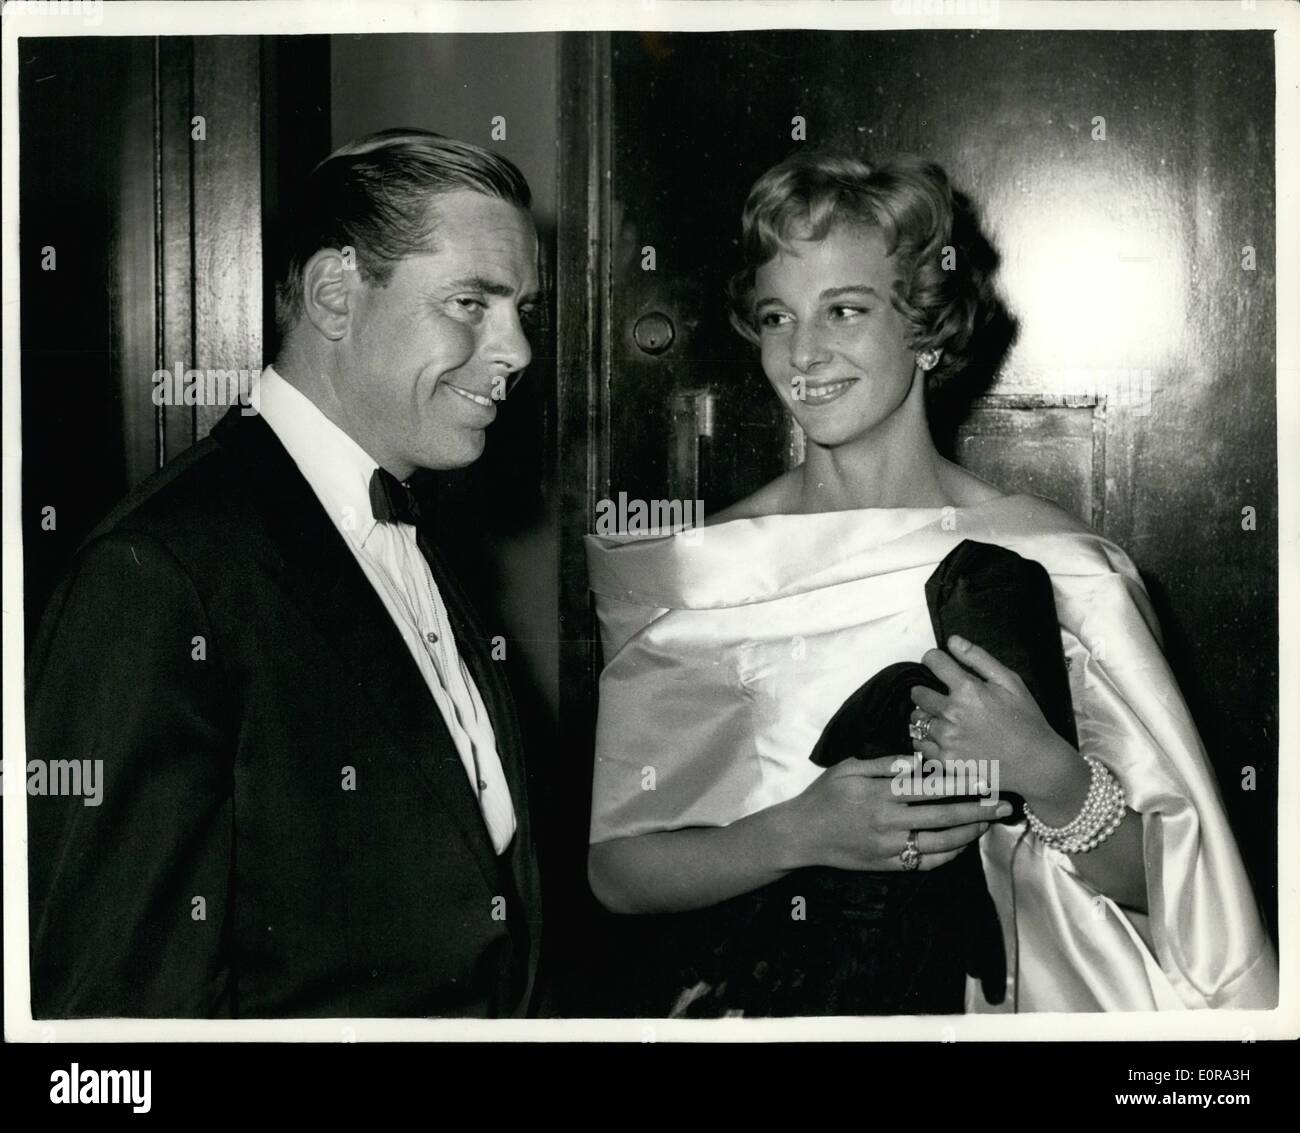 Sep. 09, 1958 - Bobo Sigrist Steps Out With Hollywood's Eligible Bachelor Heiress Bobo Sigrist who separated from her husband Gregg Juarez three months ago turned up at the first night of T.S. Eliot's ''The Elder Statesman'' at the Cambridge Theatre. She was on the arm of the handsome young film producer Kevin McGlory for her first night out in the West End since she arrived in London. Kevin said he was a very old friend of Bobo's mother, who he had known for years Stock Photo